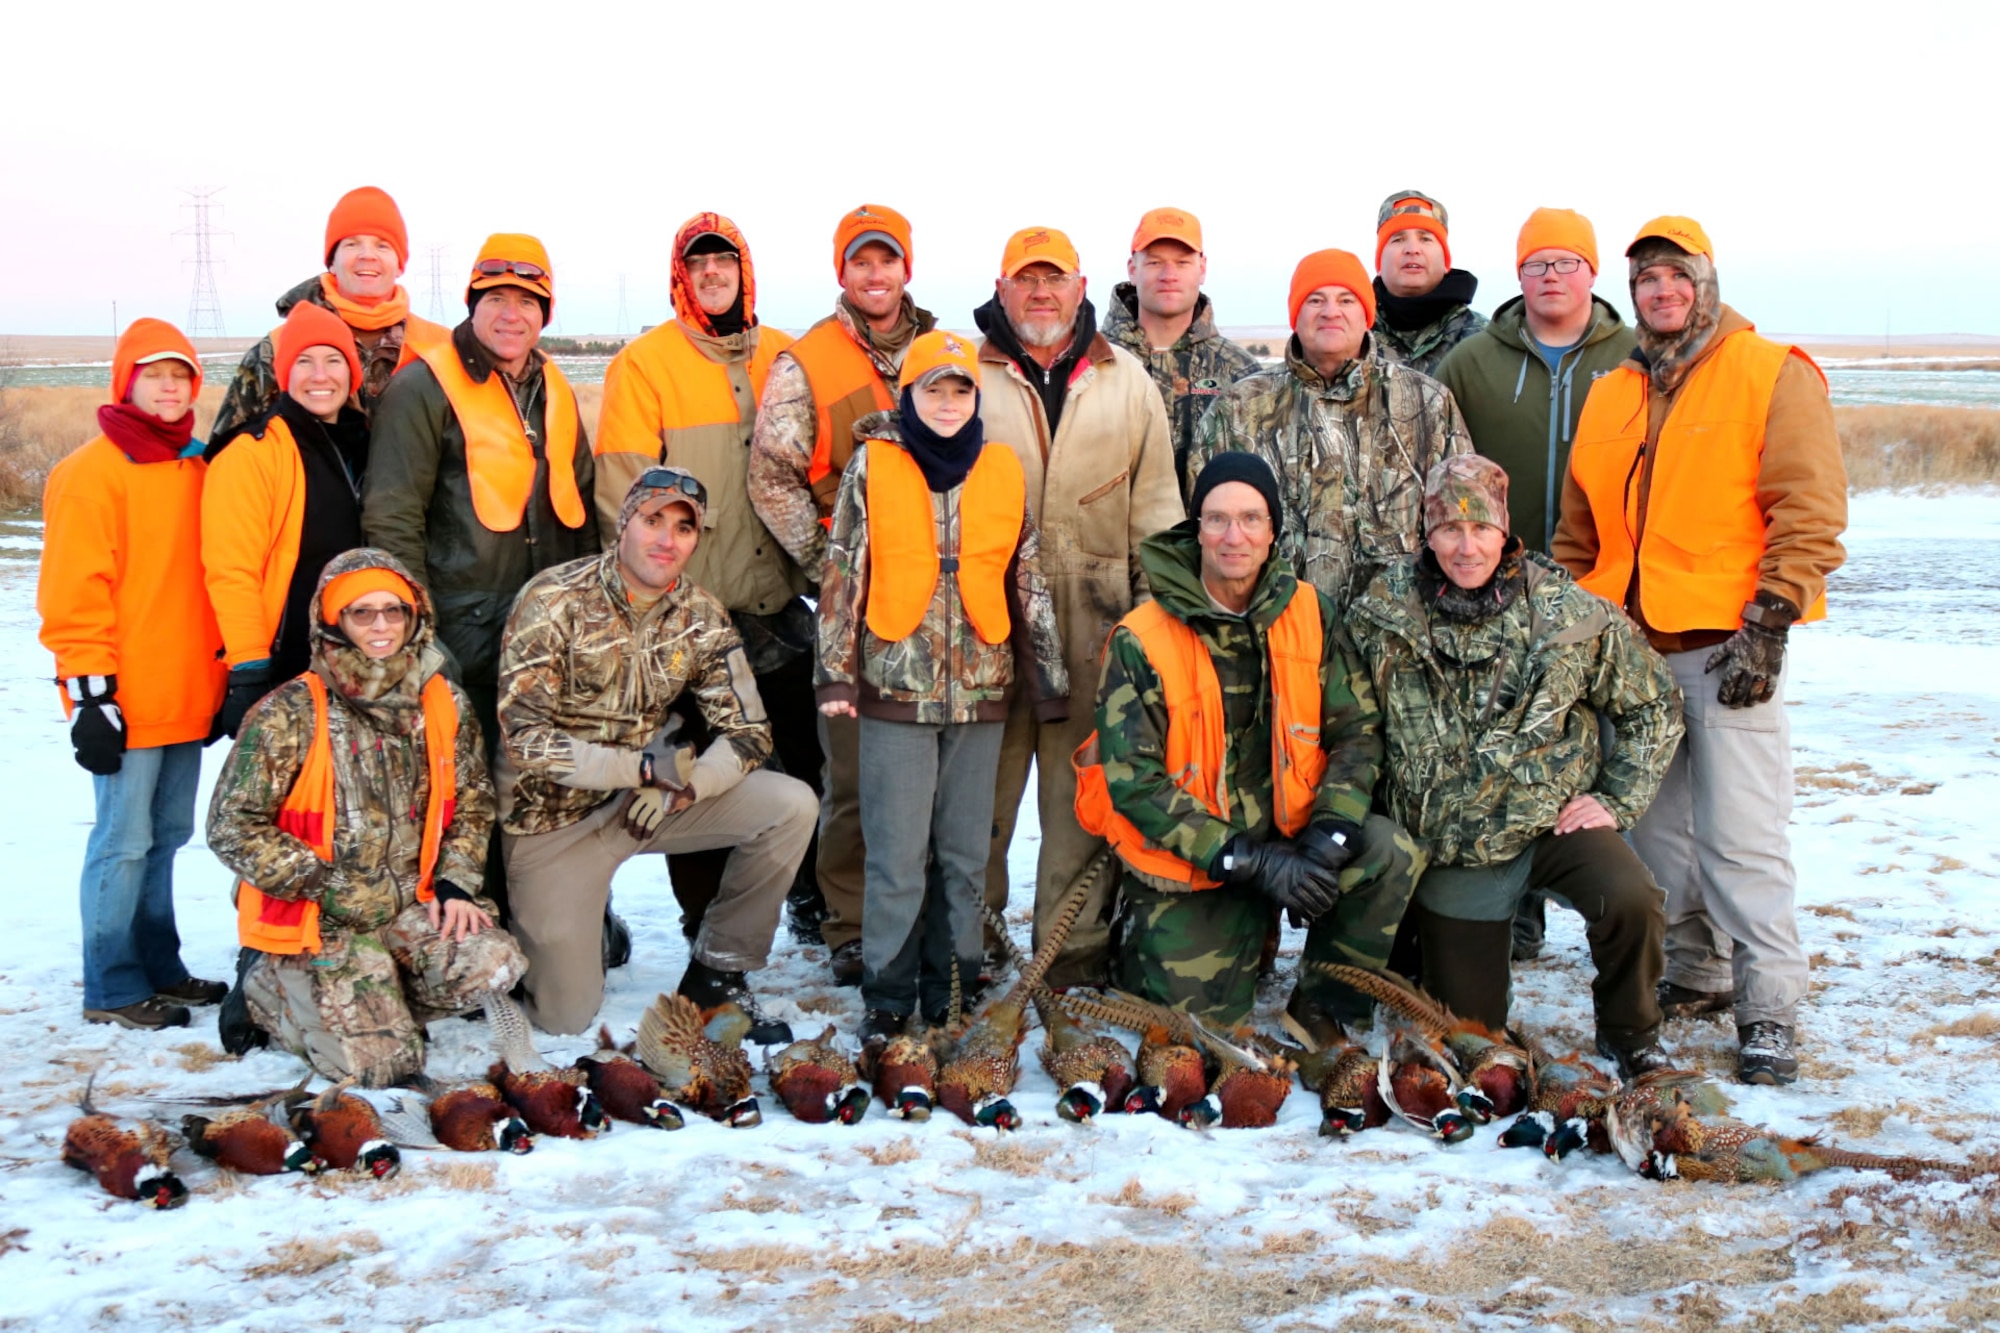 Terry Ness (back row center) and retired Lt. Col. Gerald Walzel (fourth front row) provided Airmen and their families an opportunity to experience pheasant hunting on their land near Onida, S.D., Nov. 19, 2016. Ness and Walzel have provided two weekends of pheasant hunting each season for Ellsworth Airmen since 2012. (Courtesy photo provided by 1st Lt. Jamie Seals)